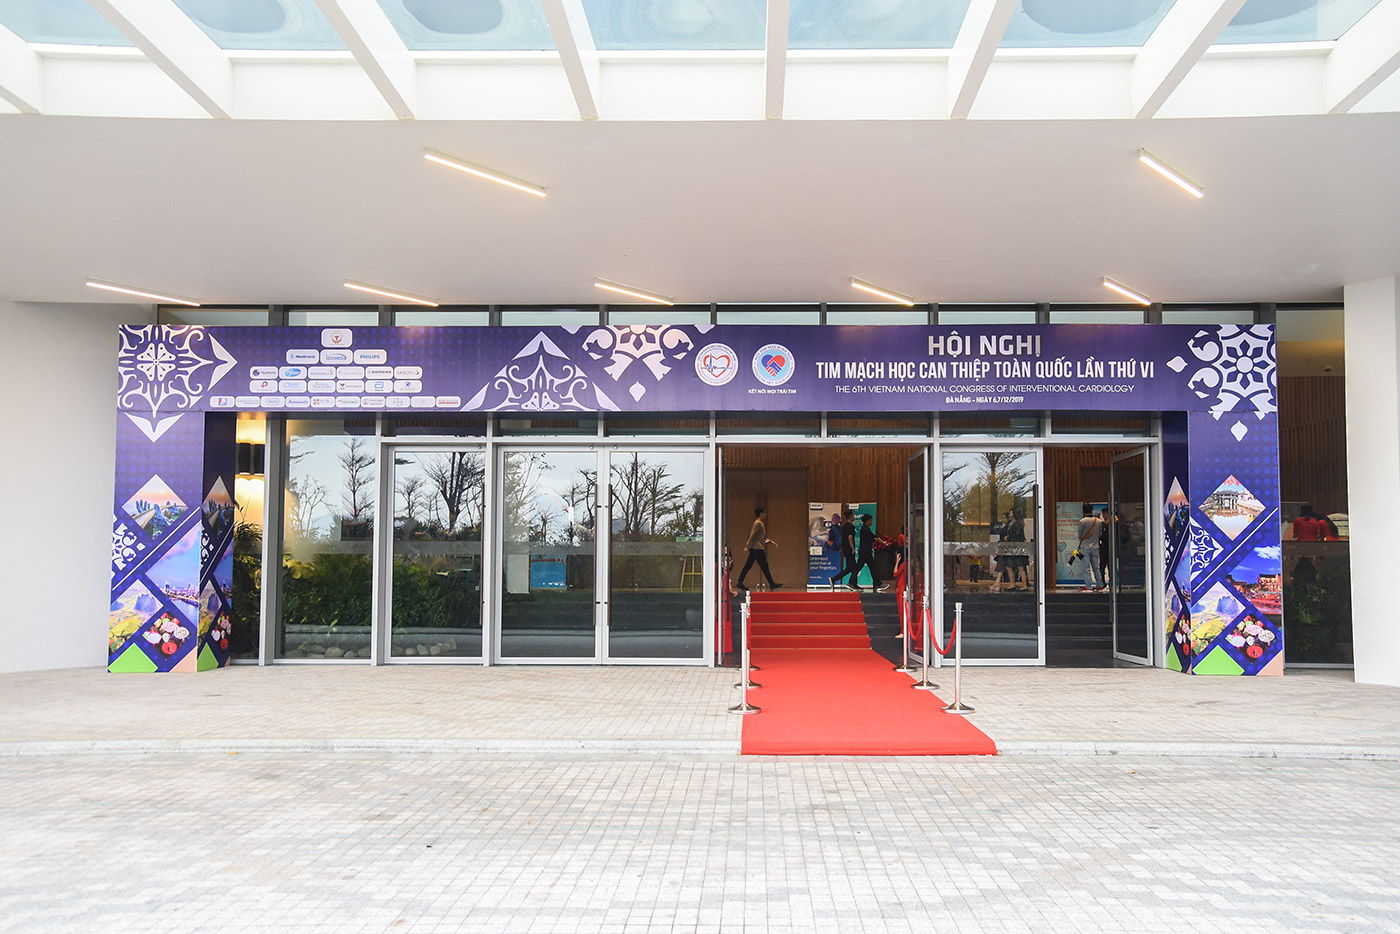 THE 6TH VIETNAM NATIONAL CONGRESS OF INTERVENTIONAL CARDIOLOGY